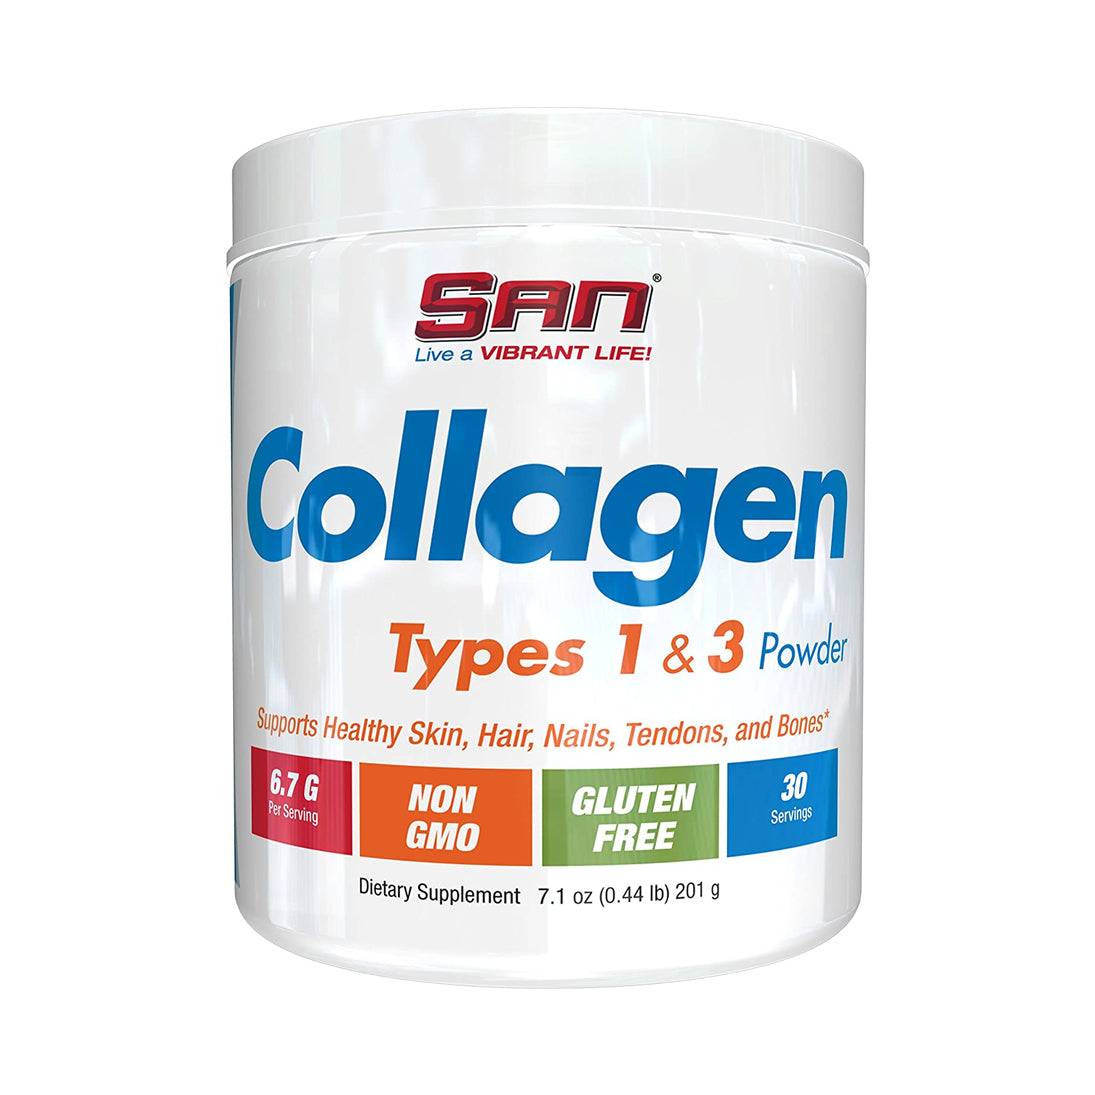 Shop SAN Collagen Type 1 & 3 Powder Online | Whey King Supplements Philippines | Where To Buy SAN Collagen Type 1 & 3 Powder Online Philippines